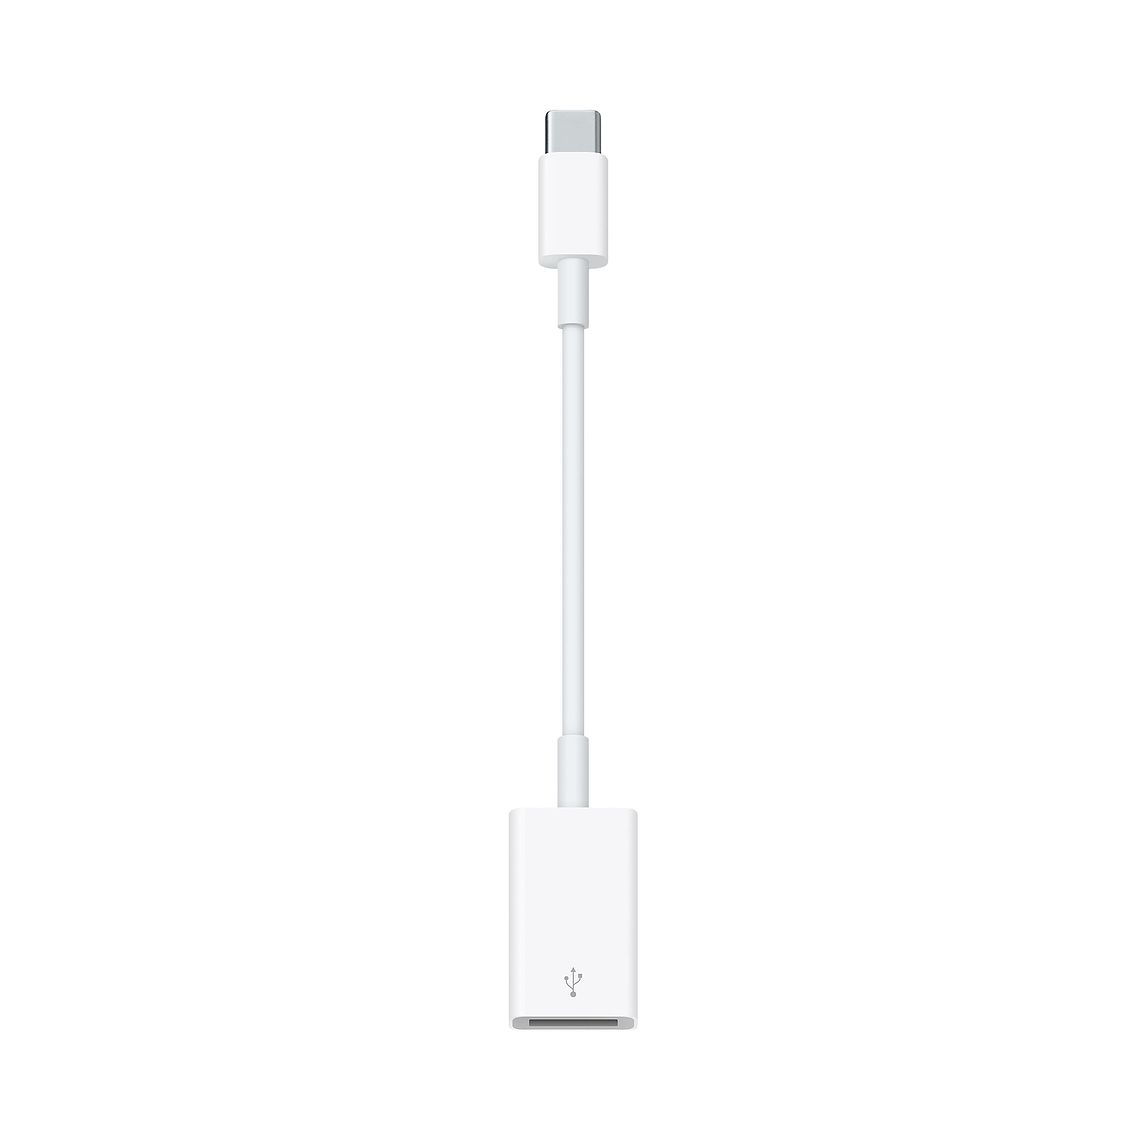 Why Invest in A Mac USB C Adapter?